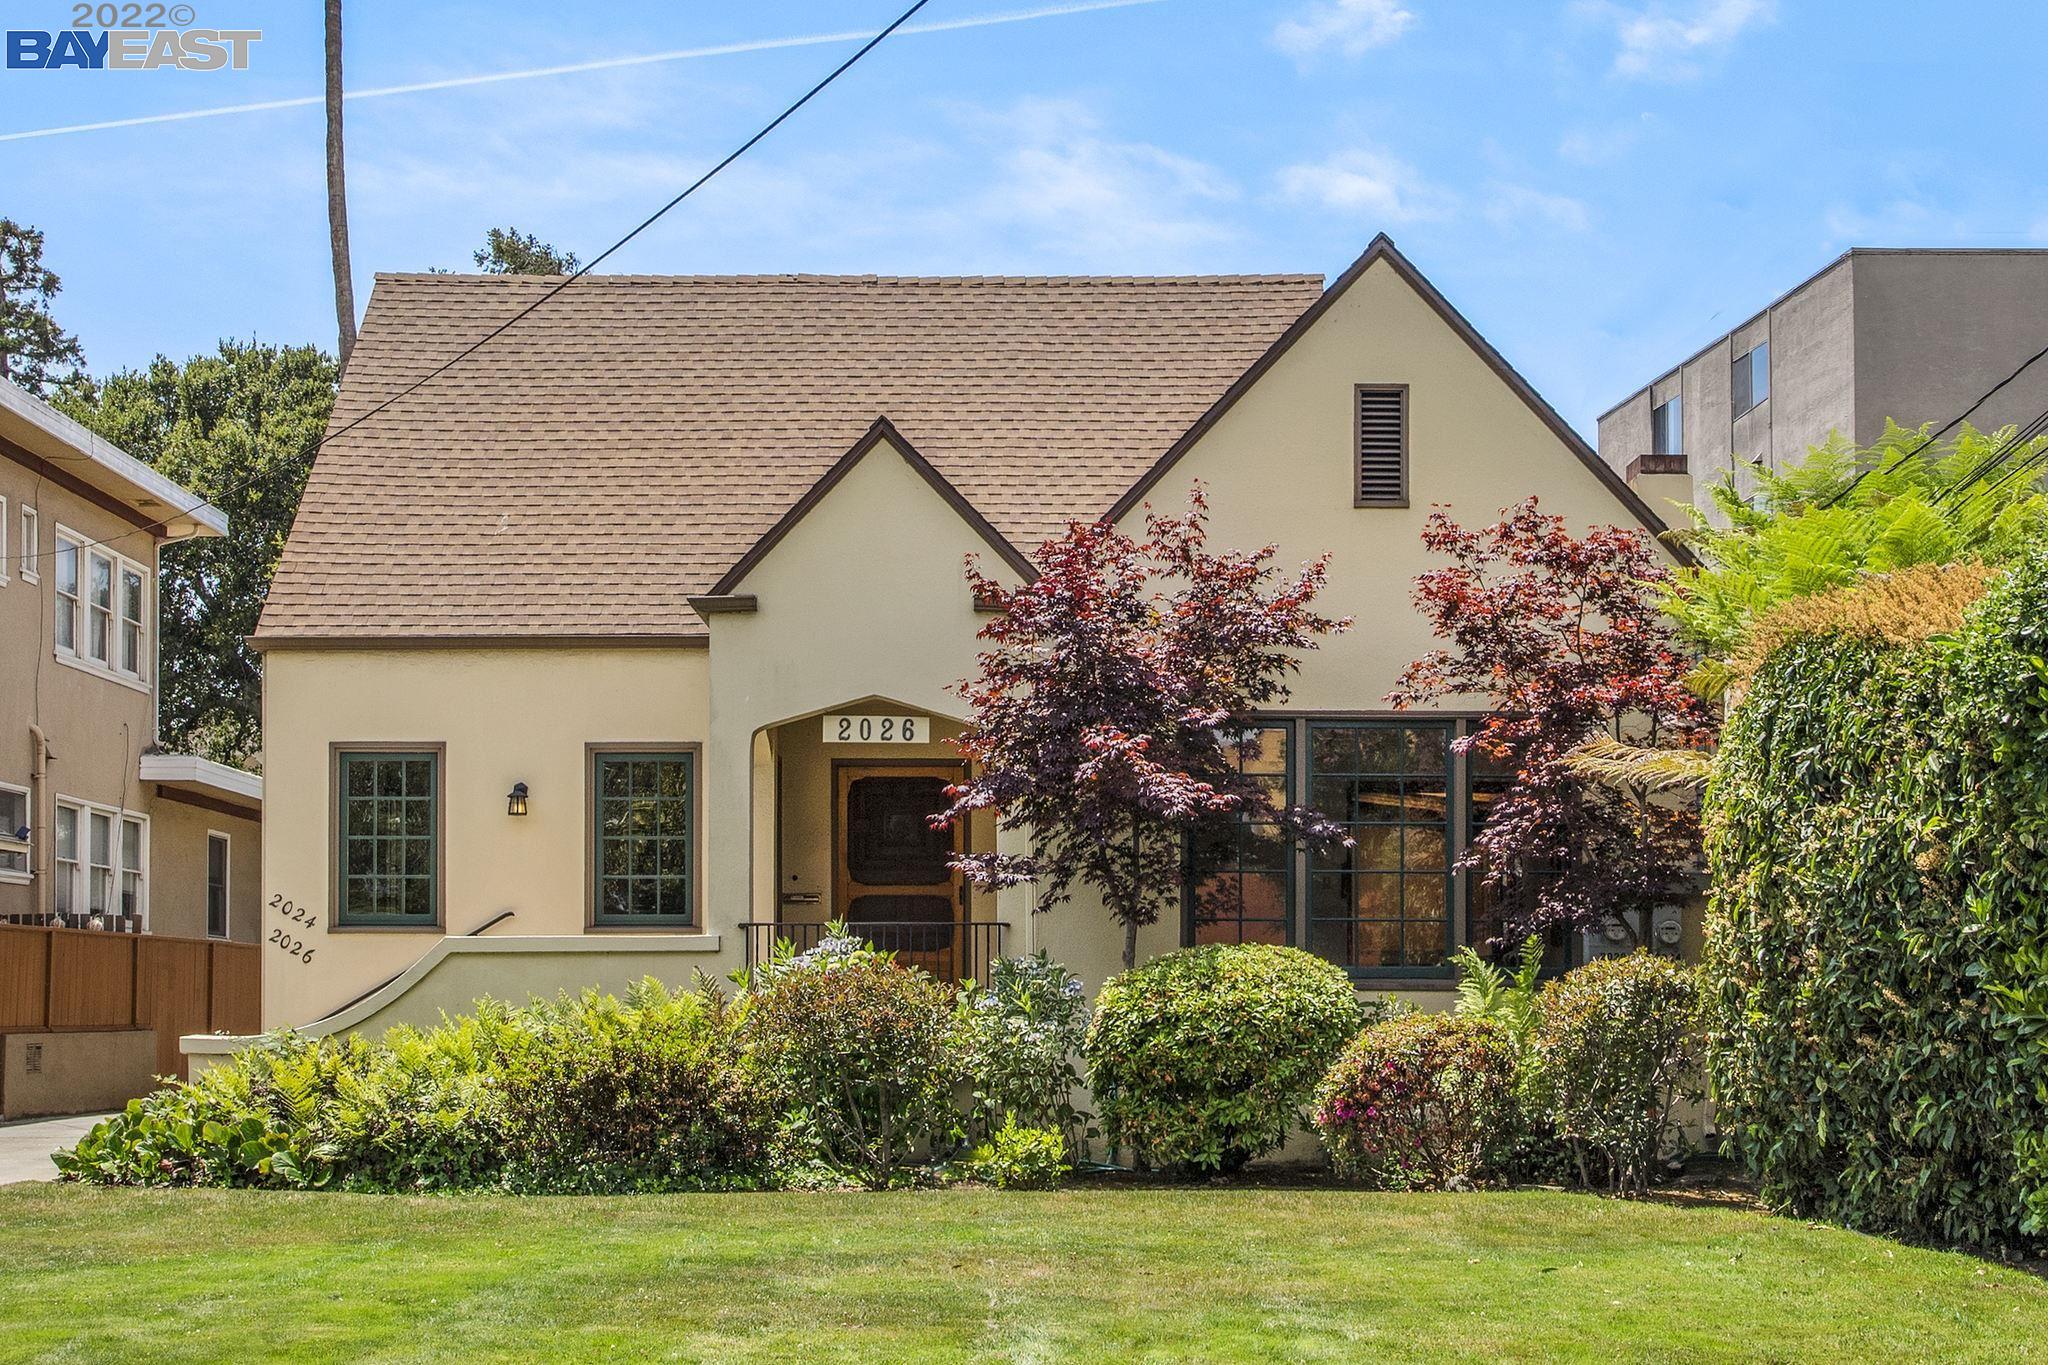 Tremendous opportunity! Live, work, rental, & possible ADU - all on a huge lot approx. 10,384 (twice the size of most Alameda lots). This classic, 1932 Tudor-Style home is set back from the street with a long driveway to the rear carports, 1+ Car garage, RV parking & more. The home and studio are approx. 2576 sf. Used as a dental office for 25+ years, the existing layout has 4BR’s, (2) half baths, a downstairs workroom, & large attic, w/ a separate rental studio apartment to offset your mortgage. The traditional formal living room has vaulted ceilings, original ornate fireplace surround, mahogany doors & trim, large picture window, & hardwood floors. A lattice-covered redwood deck off the upper bedrooms extends across the rear of the home and leads to a lovely backyard with oak trees, roses, & jasmine. Make this one your dream home! An application has been submitted to the city to reconfigure the home to a 3BR/3.5BA home with 2 primary suites, a gorgeous, open kitchen + a new ADU.